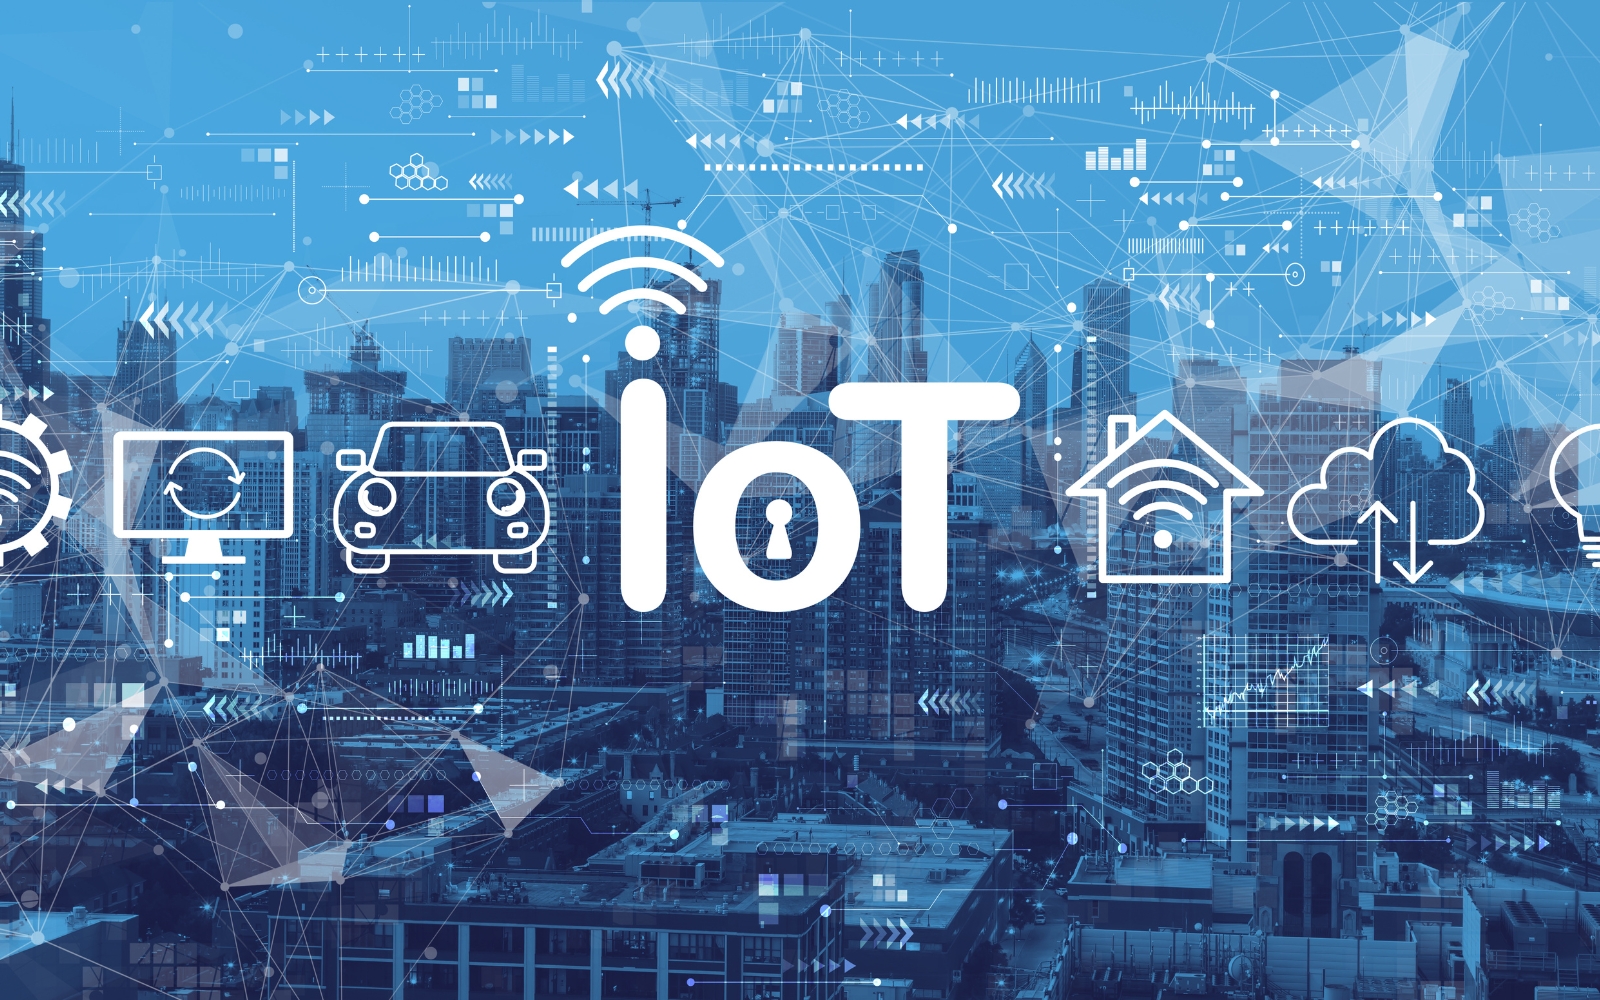 MQTT, the open-source messaging protocol for IoT